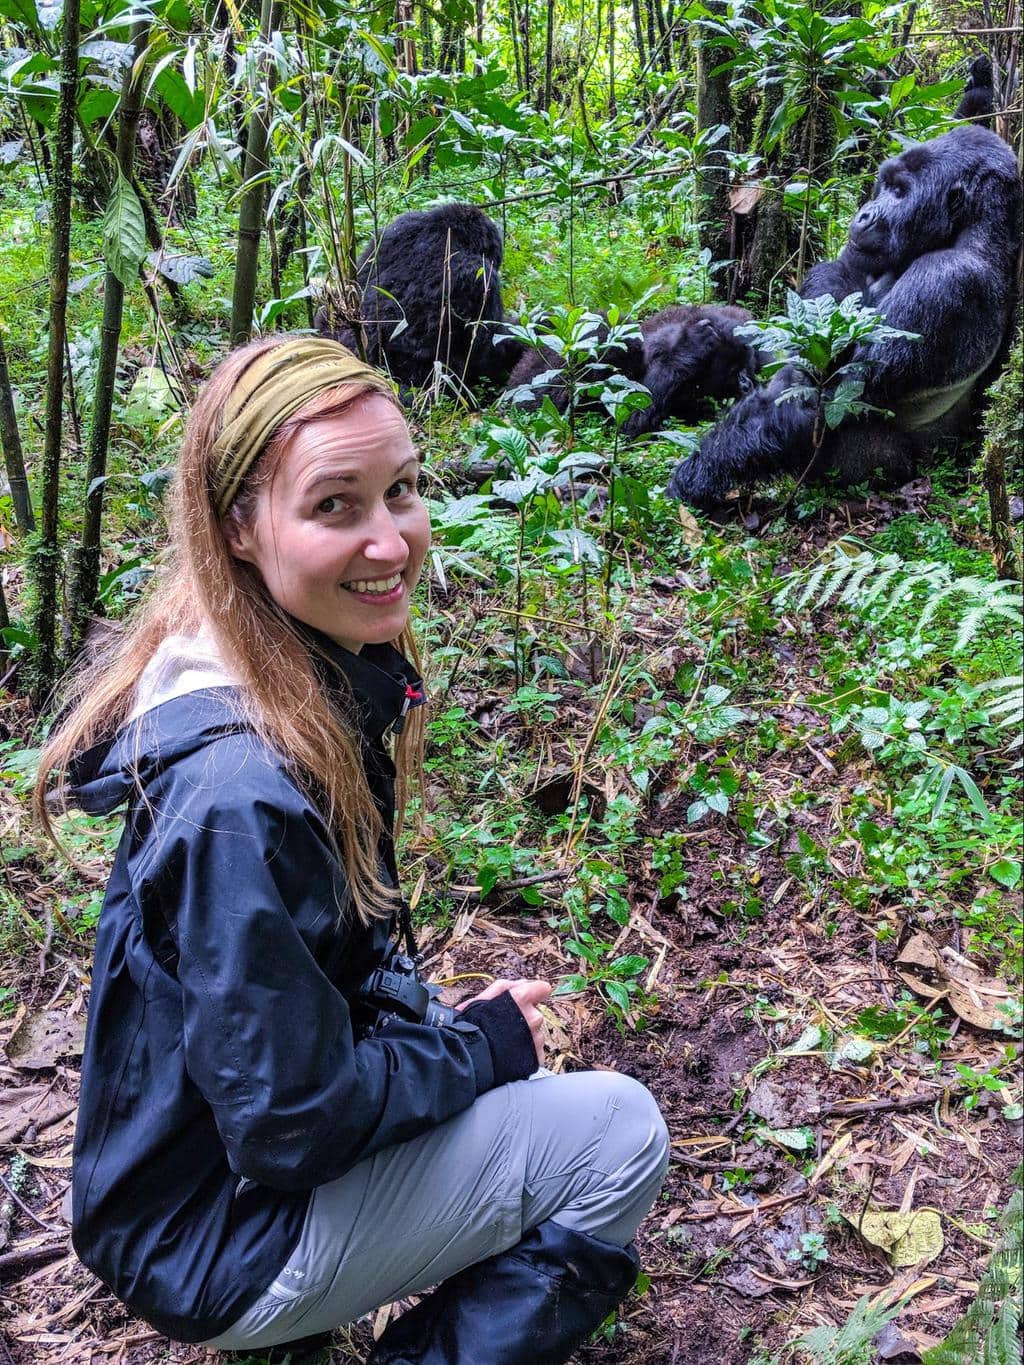 This is how close you can get to the gorillas in Rwanda